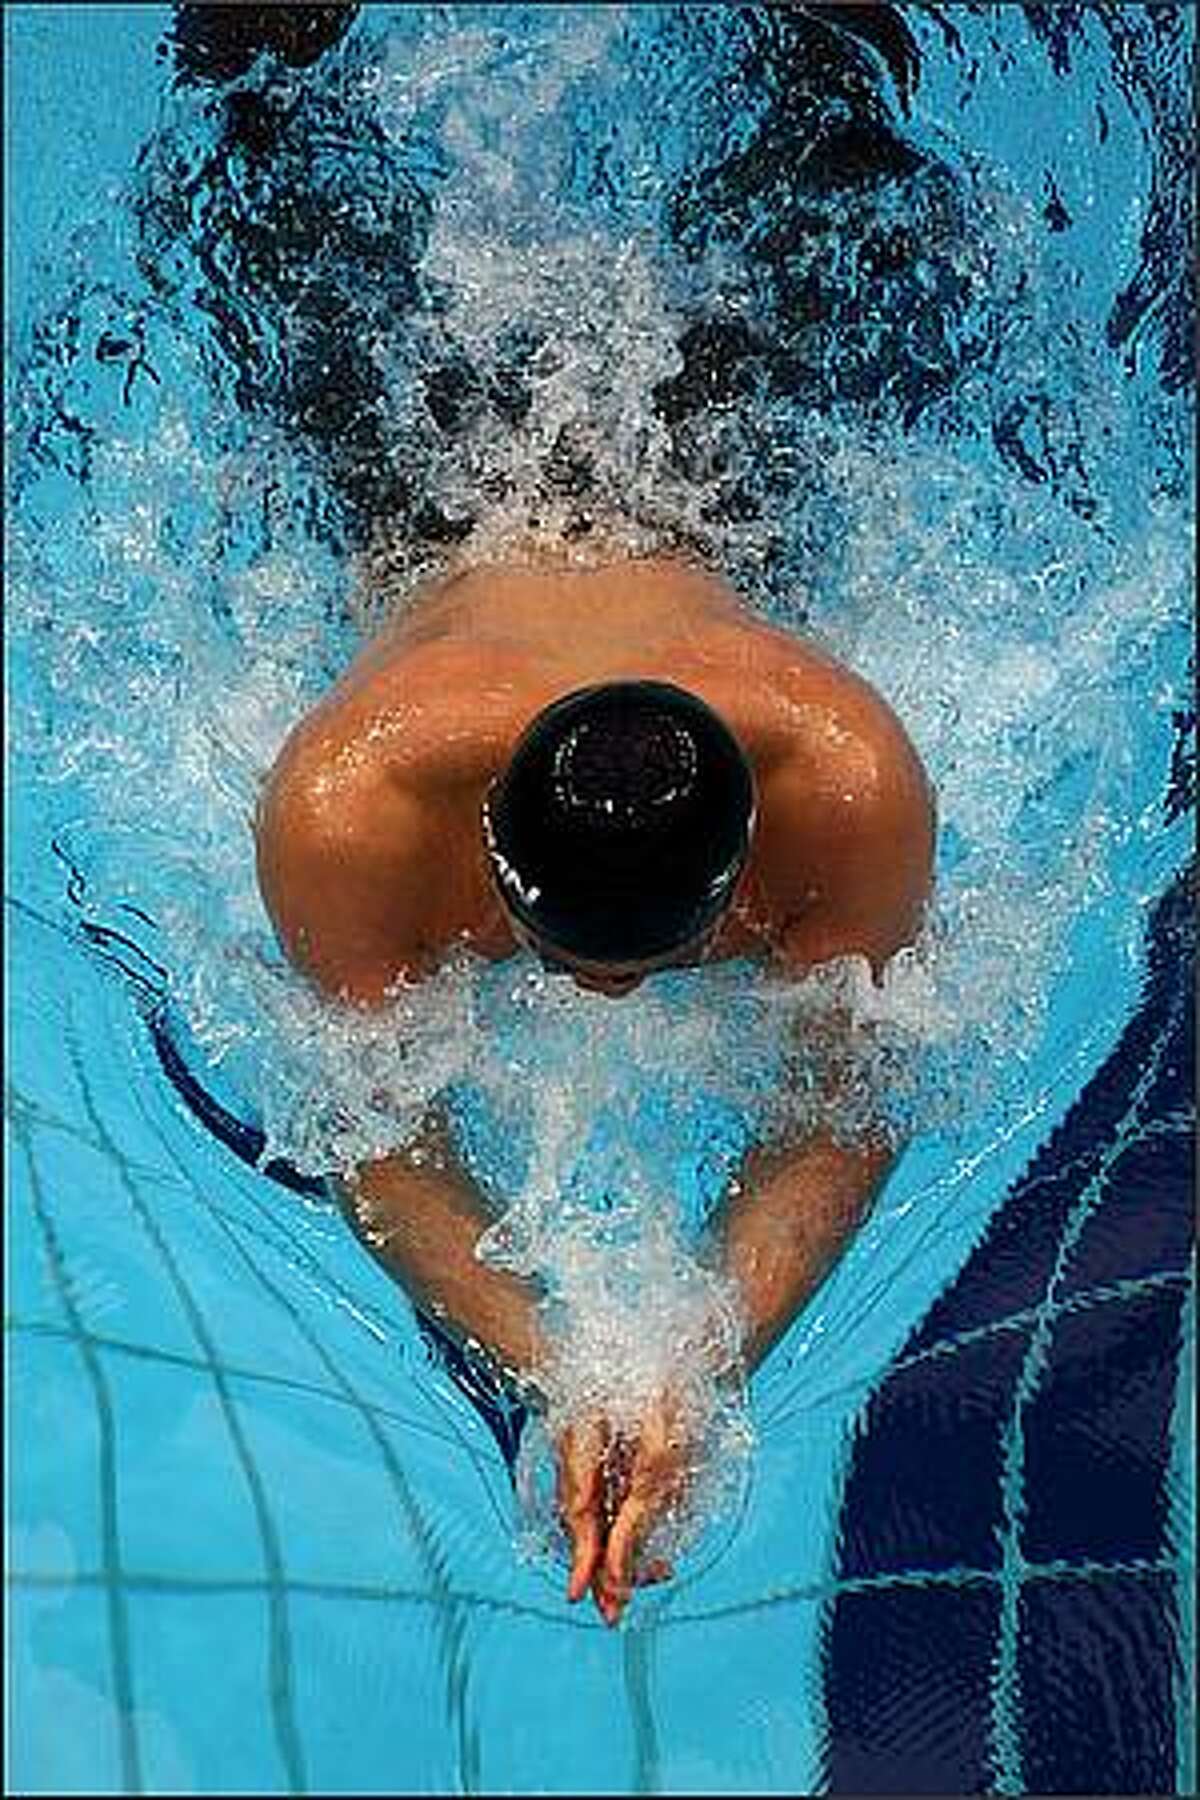 Kosuke Kitajima of Japan competes in the Men's 200m Breaststroke Final at the National Aquatics Centre during Day 6 of the Beijing 2008 Olympic Games in Beijing, China. Kosuke Kitajima of Japan finished the race in a first place in a time of 2.07.64 a new Olympic Record. (Photo by Mike Hewitt/Getty Images)